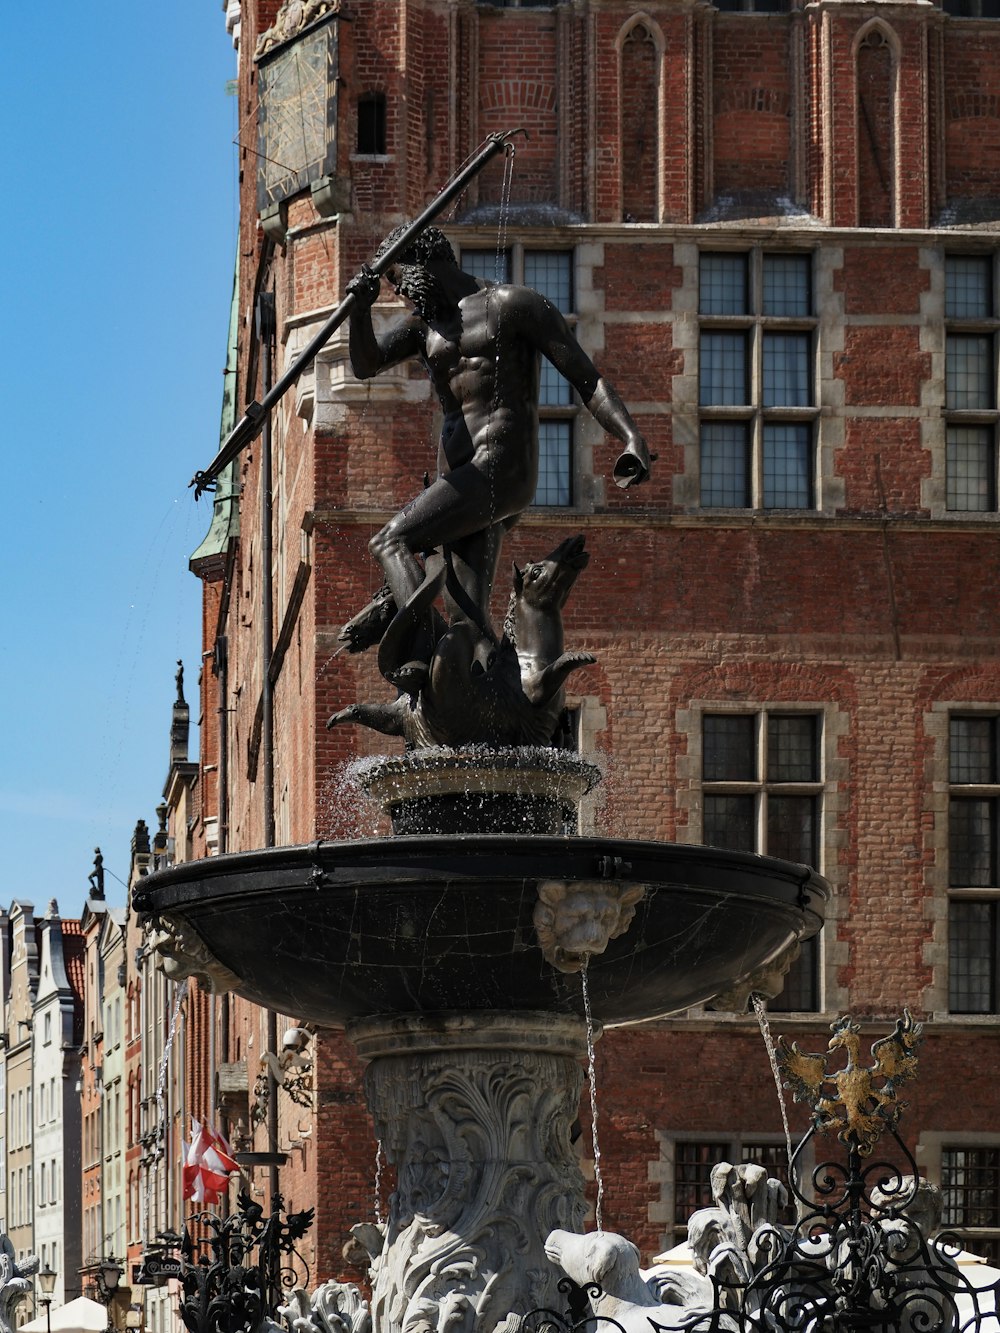 a fountain with a statue of a man holding a sword